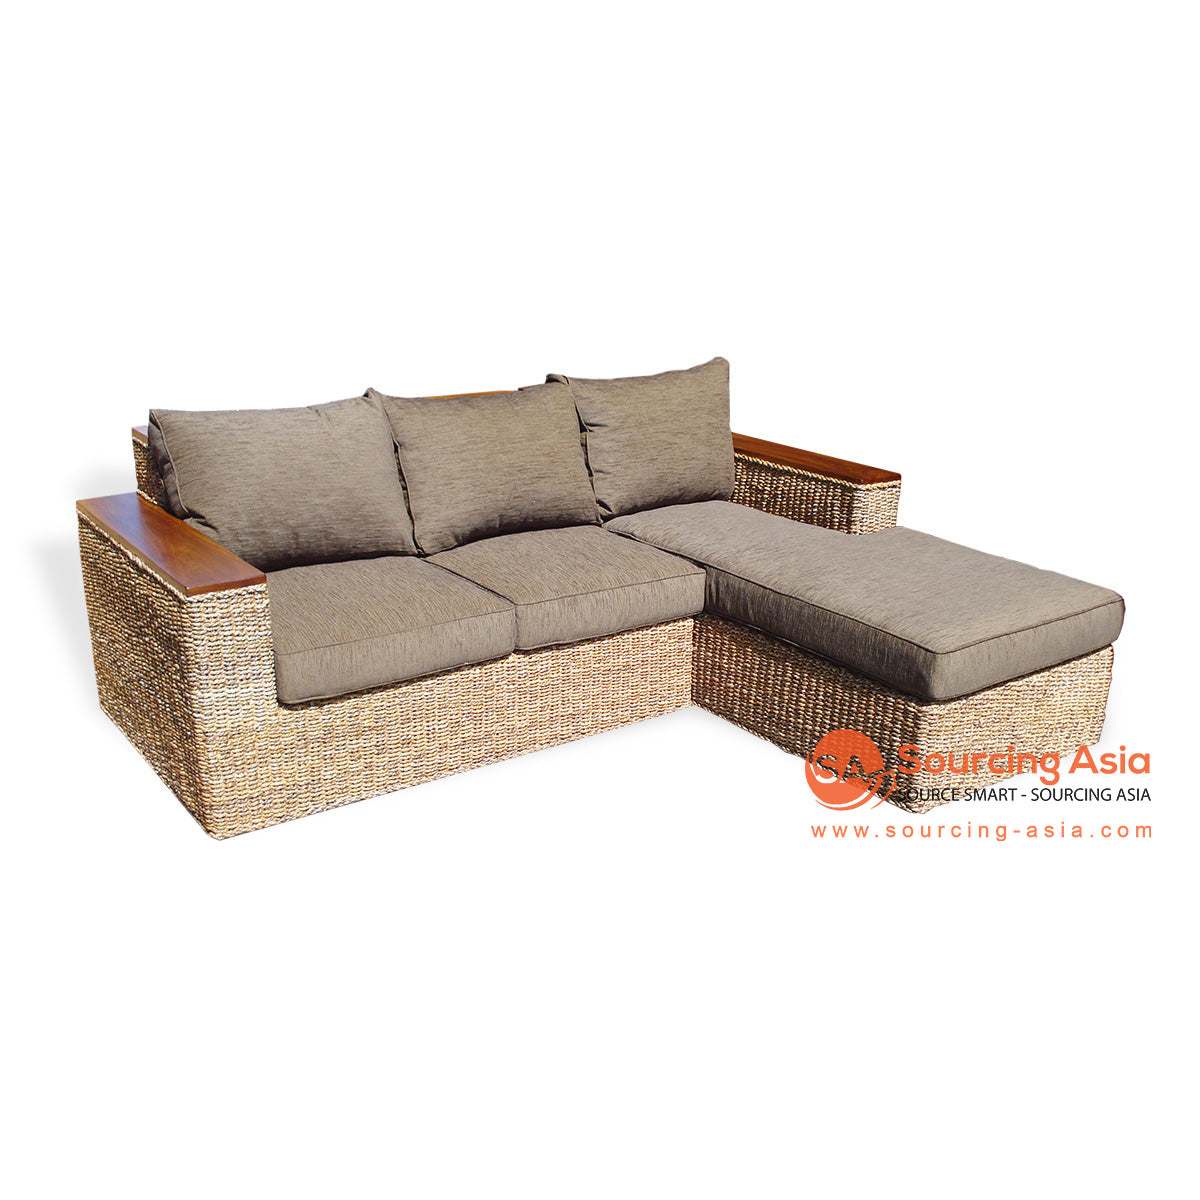 SF33-1 NATURAL BANANA FIBER TWO SEATS MOROCCO SOFA WITH CHAISE AND TIMBER ARMS (PRICE WITHOUT CUSHION)